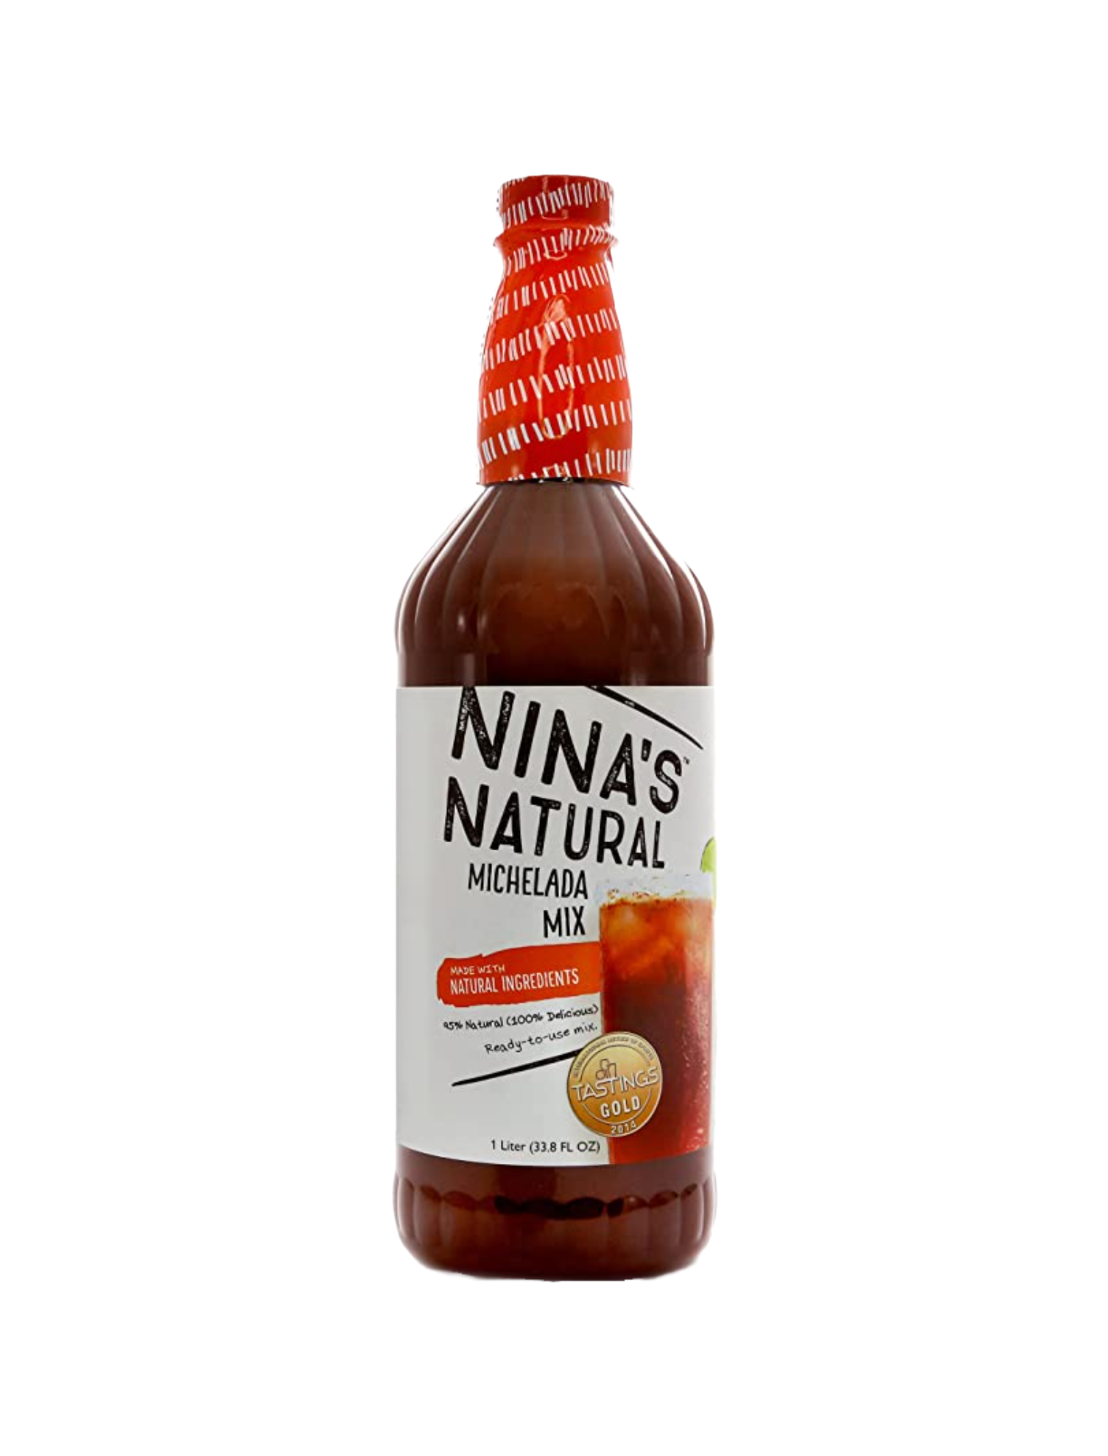 Bottle of Nina's Natural Michelada Mix with an orange label in front of a plain white background